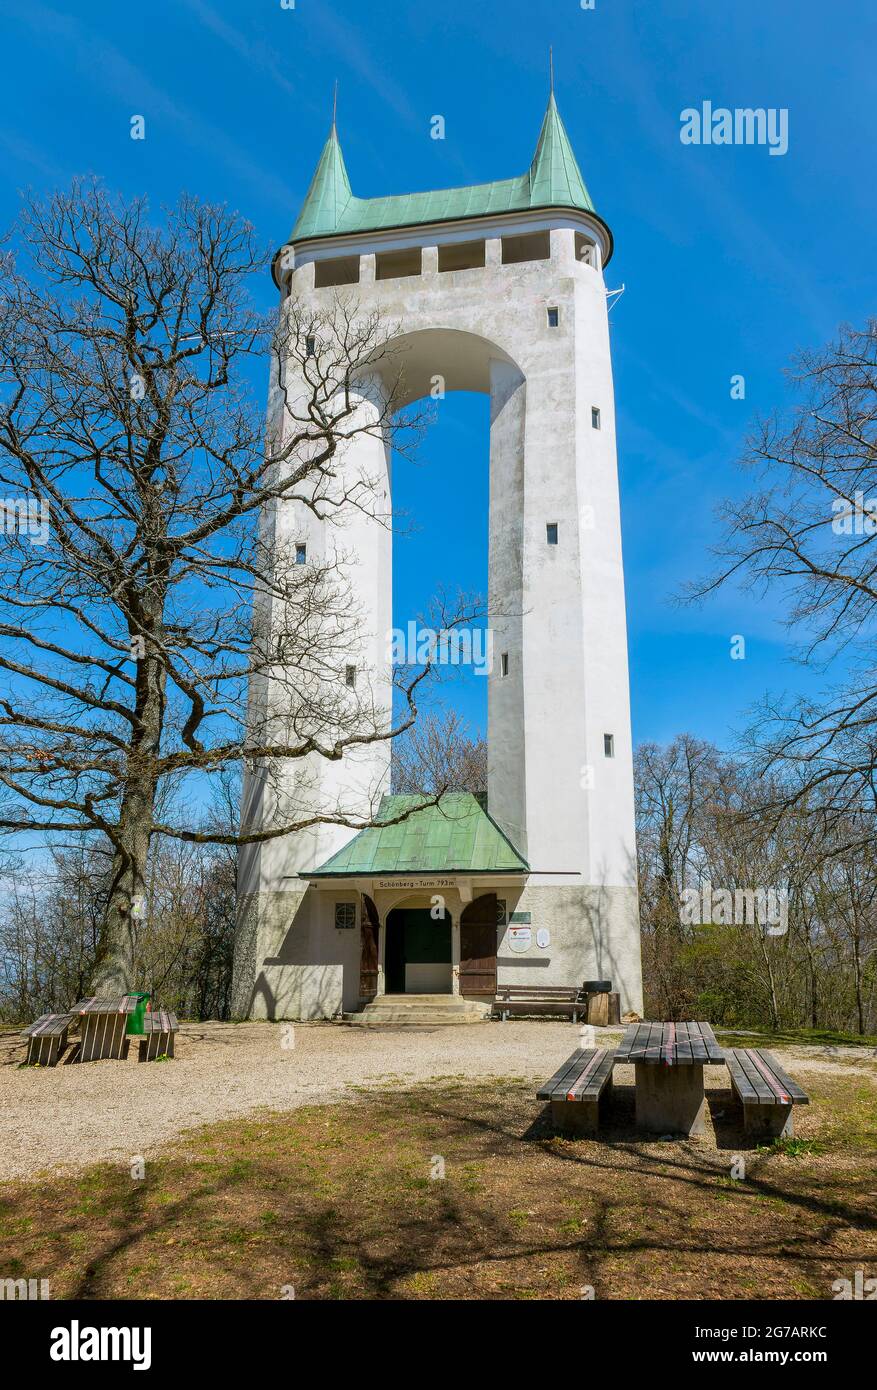 Germany, Baden-Wuerttemberg, Pfullingen, the excursion destination Schönbergturm on the Schönberg, Swabian Alb. The 26.4 m high tower was the first tower in the world to be built in reinforced concrete. Architect: Theodor Fischer At the rest area, benches and tables are closed due to the Corona regulation. Stock Photo